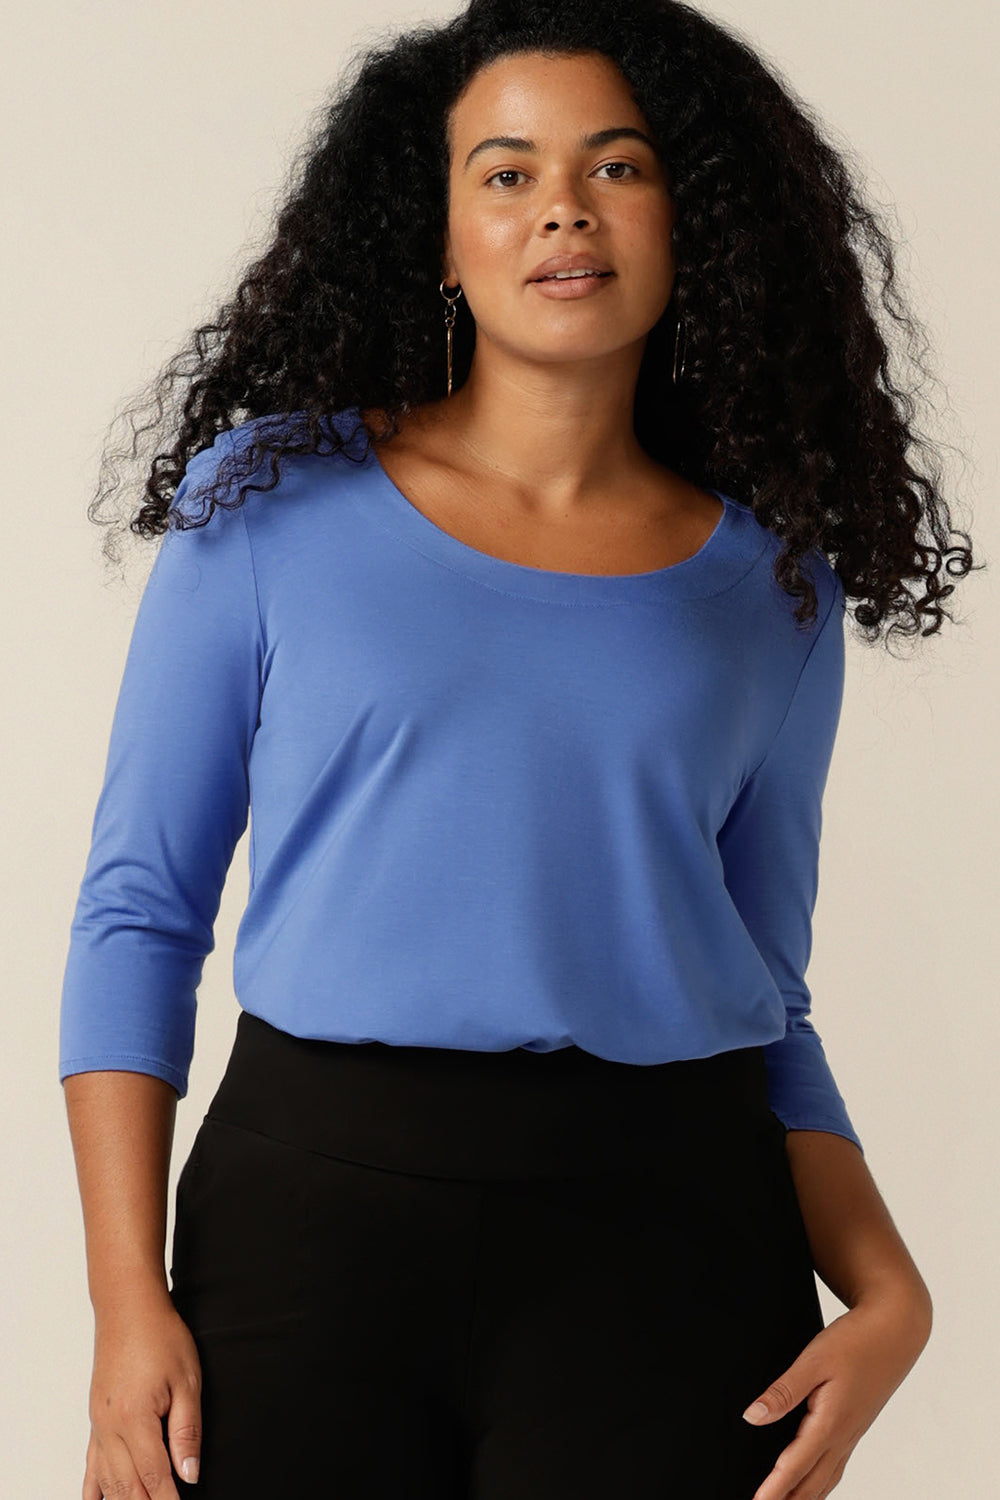 A curvy size 12 woman wears a blue bamboo jersey top. The top has a round neckline, 3/4 sleeves, and a curved shirttail hemline. Made in bamboo jersey, this top is made from sustainable, natural fibres that are lightweight and breathable and part of the movement towards eco-conscious fashion.